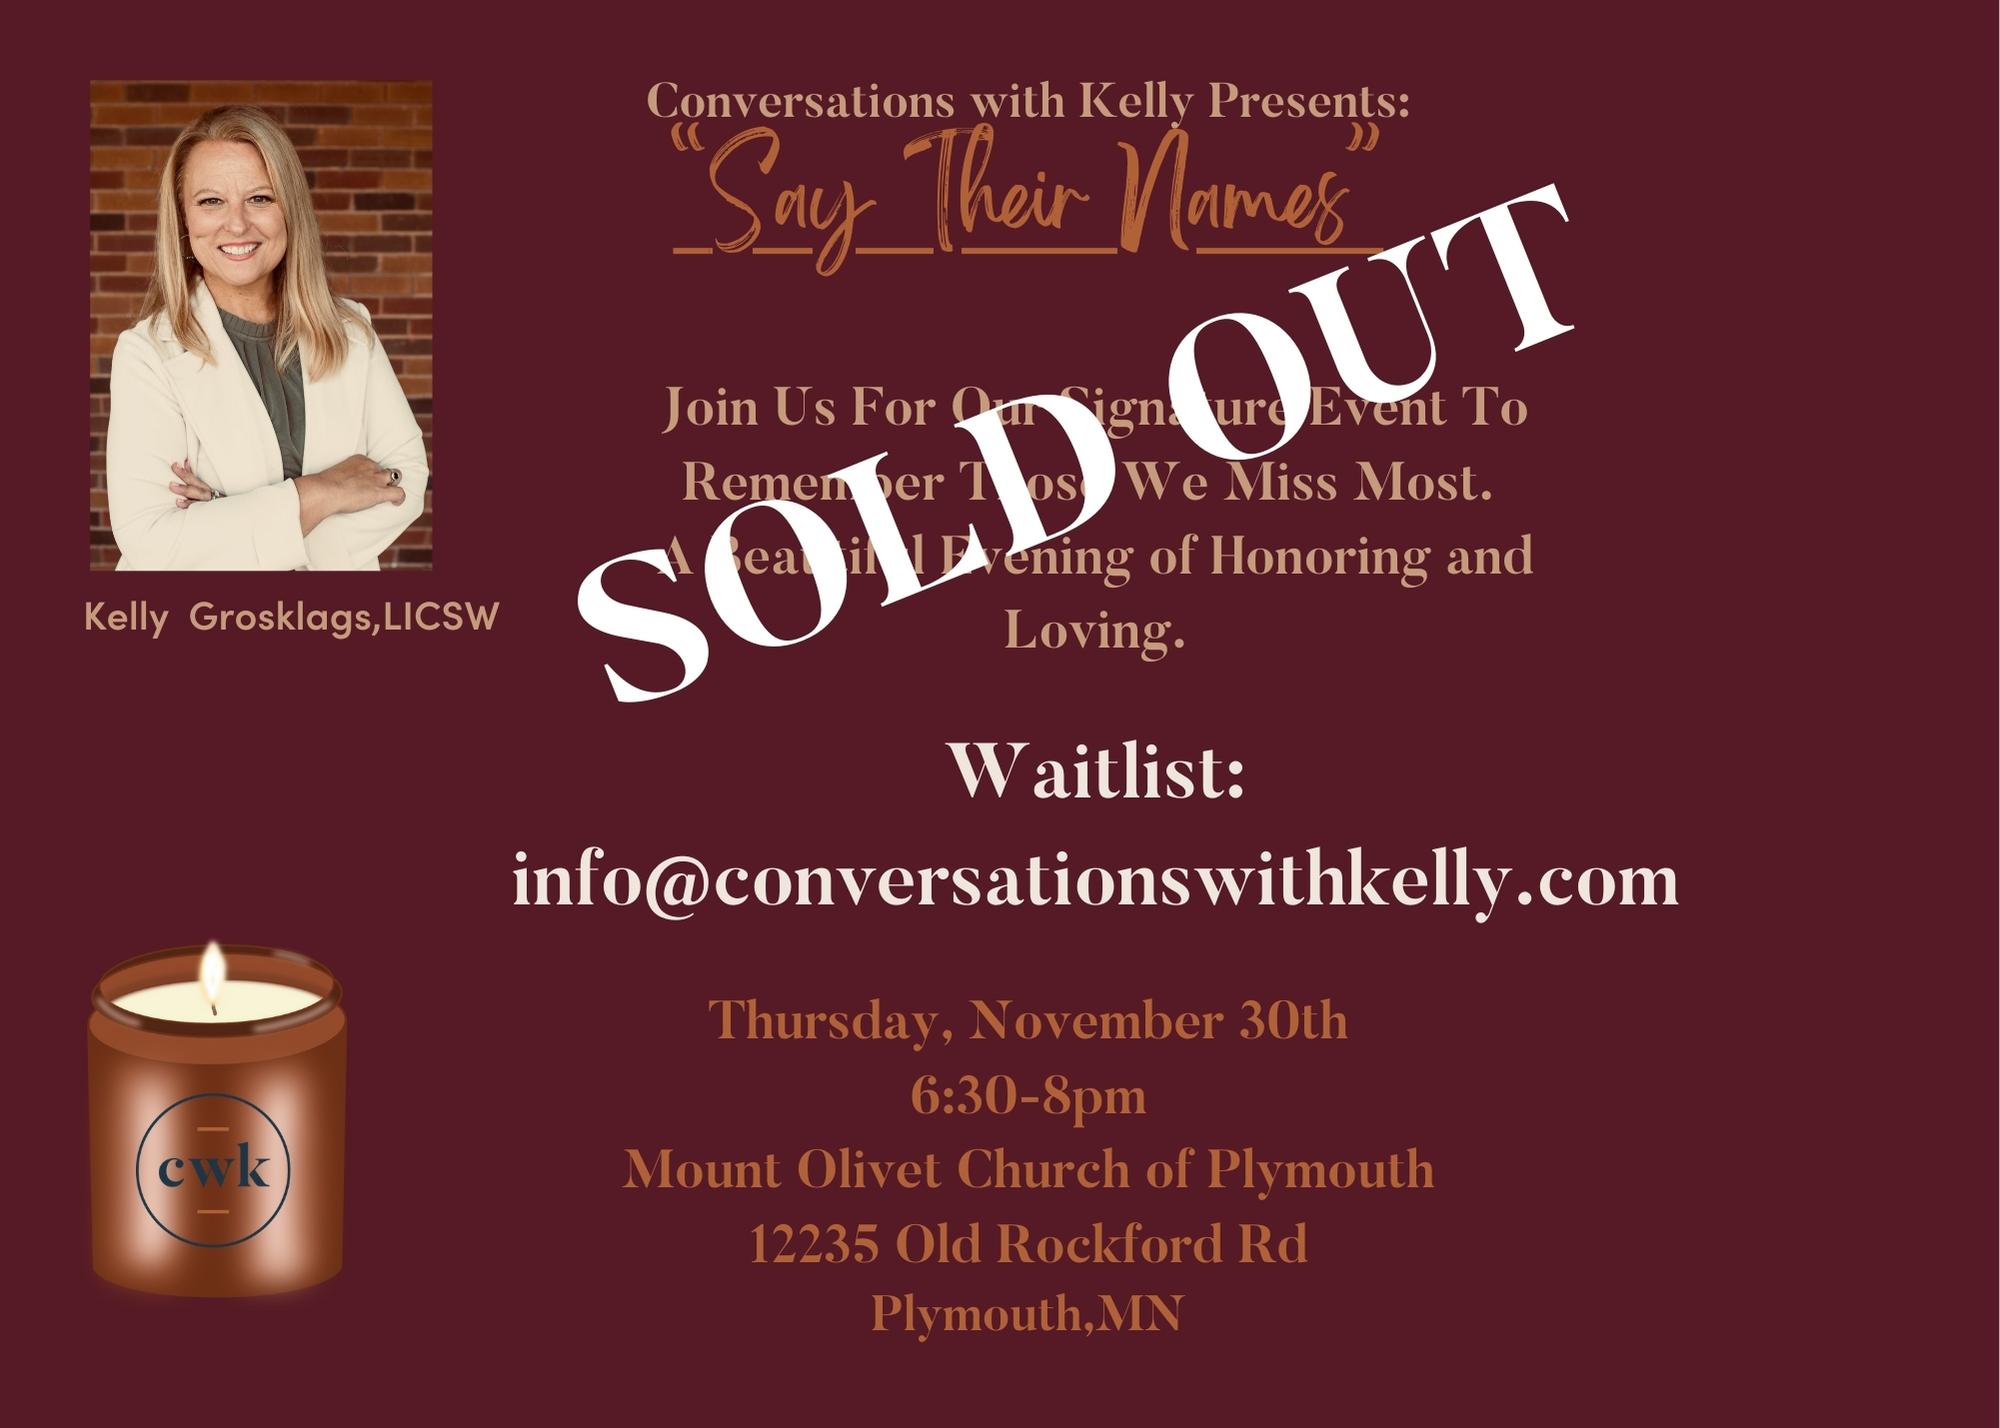 This event is sold out. Please email us at info@conversationswithkelly.com if you would like to be on a waitlist.